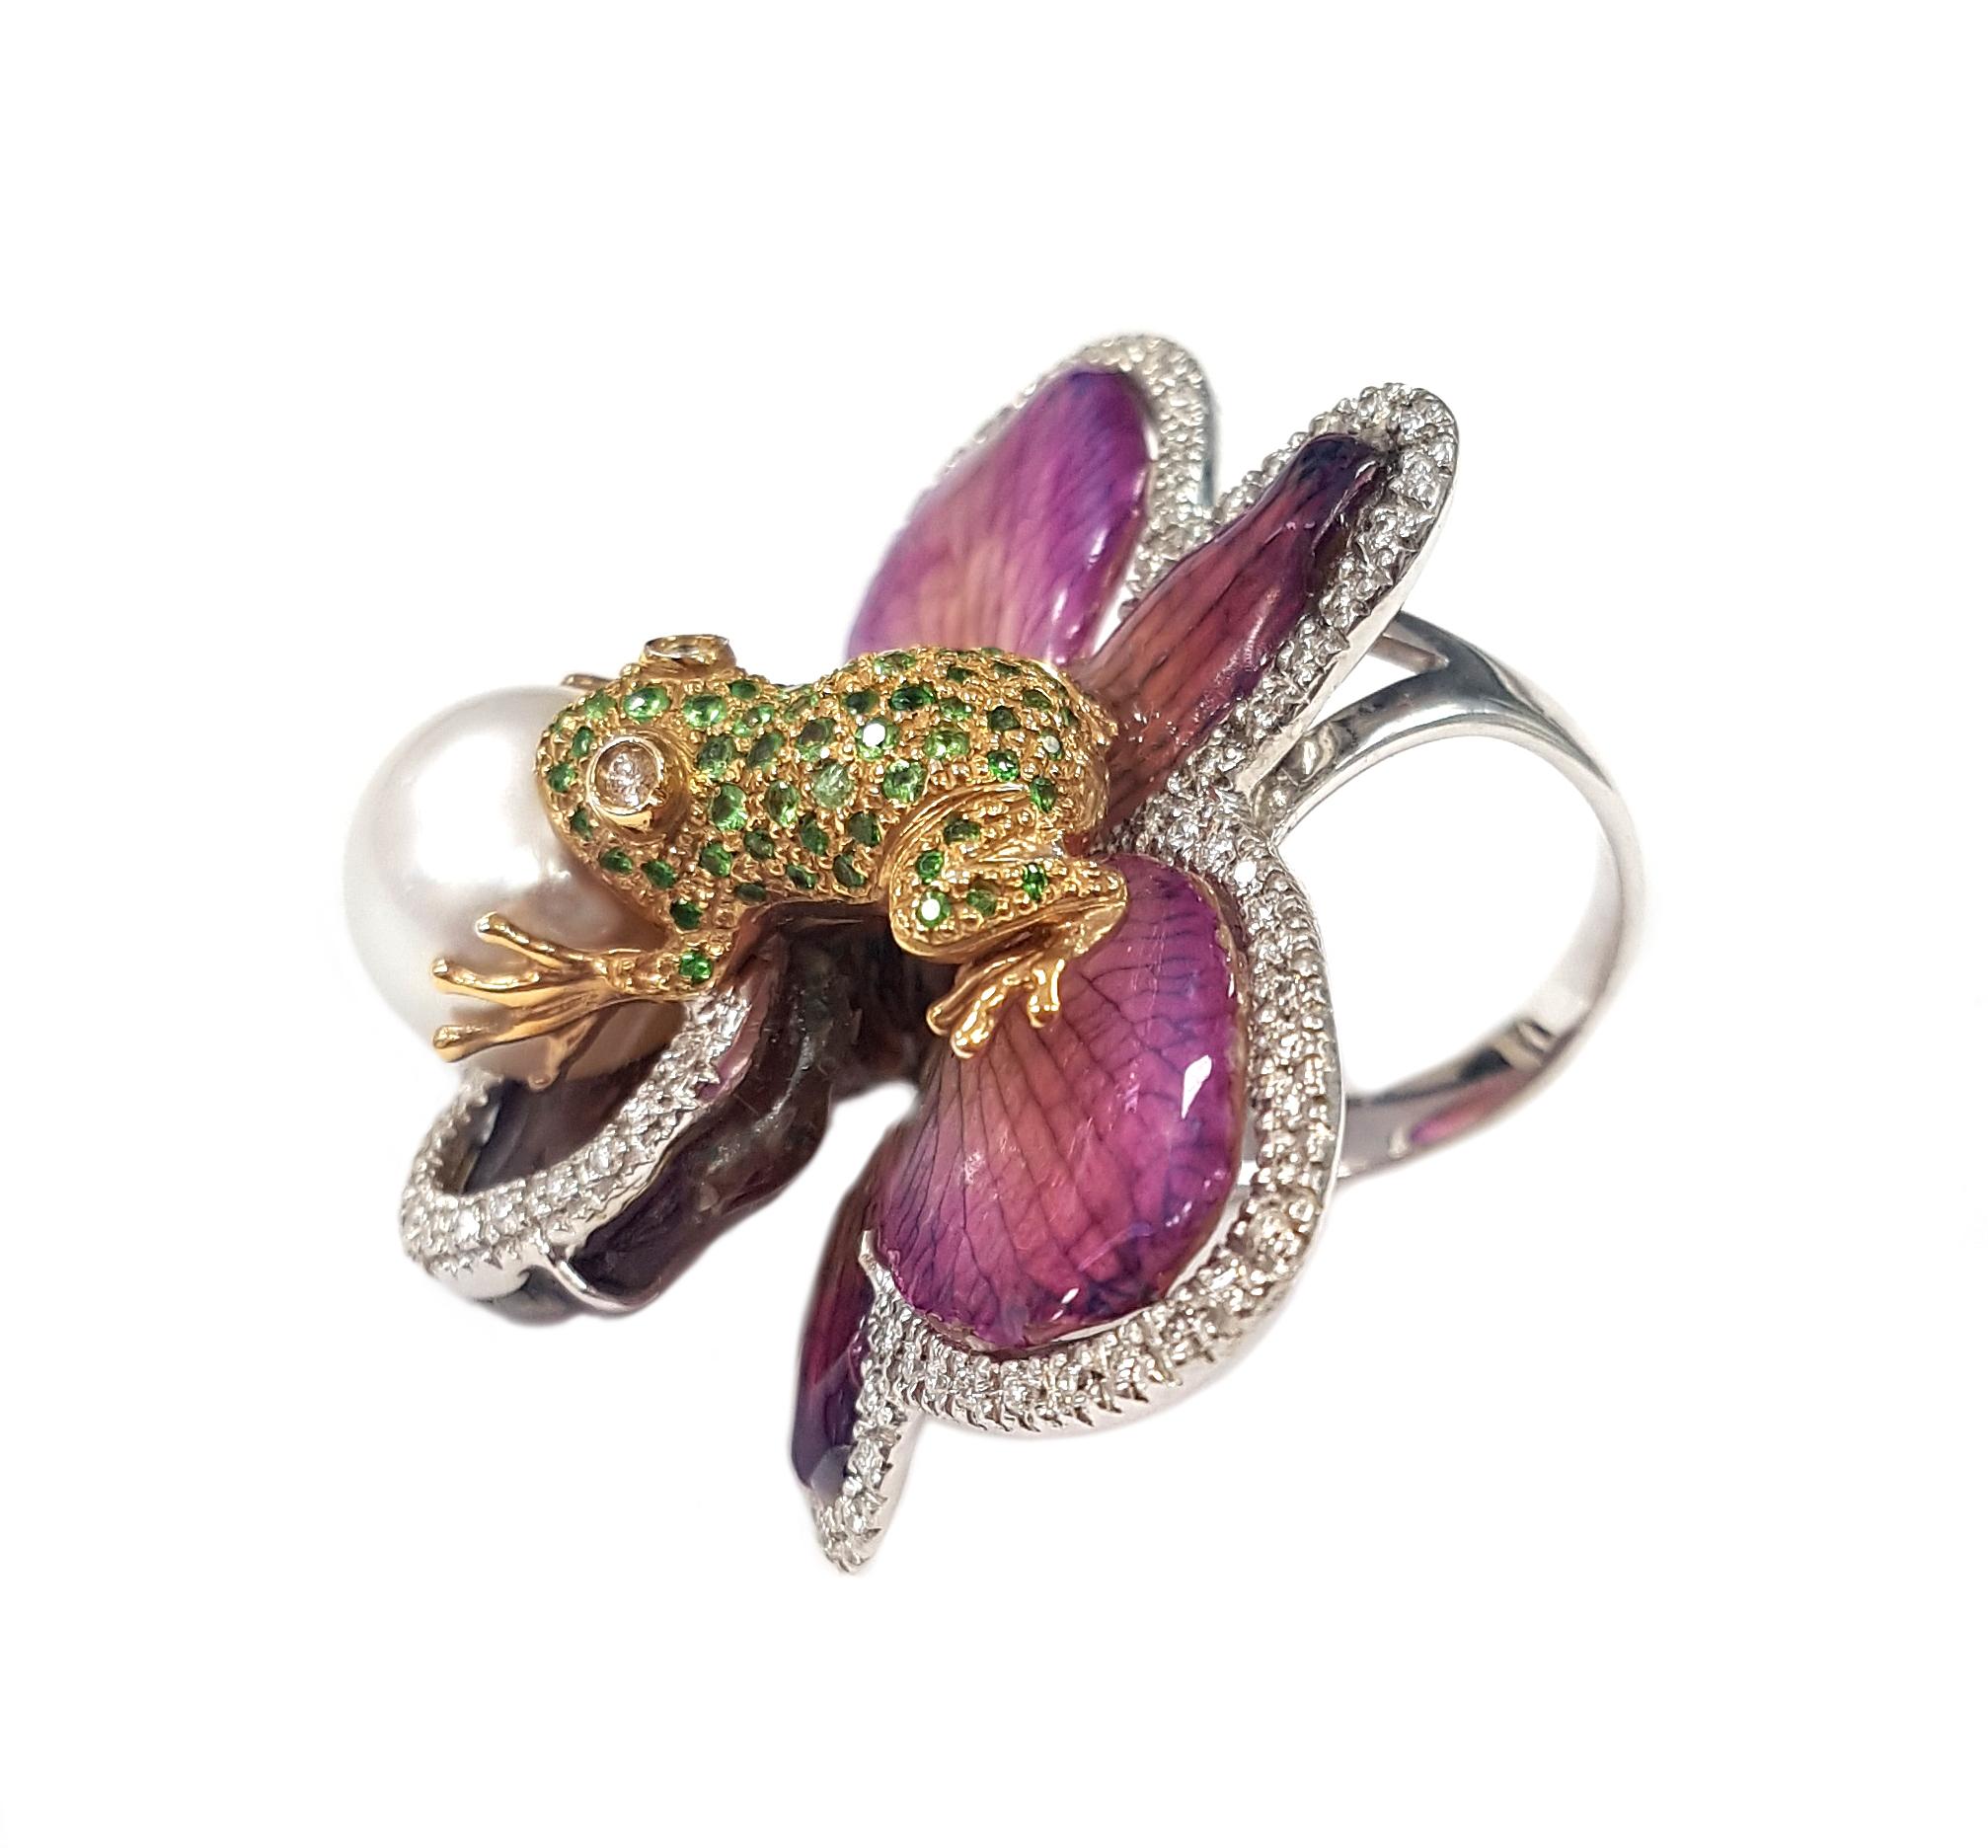 Contemporary White Gold Cocktail Ring with Orchid and Frog